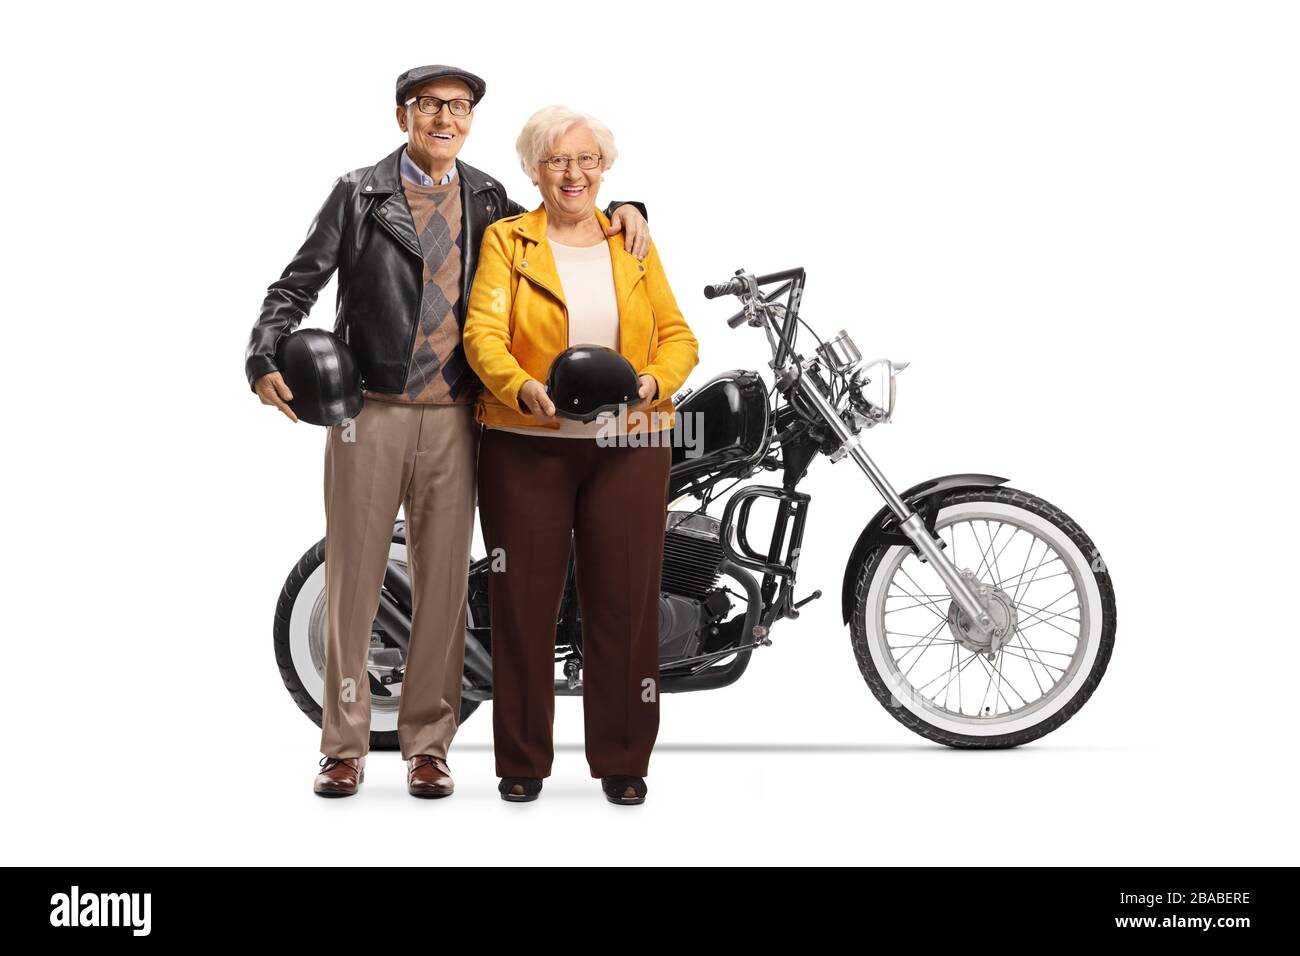 Full length portrait of a senior couple standing next to a custom made chopper motorbike isolated on white background Stock Photo